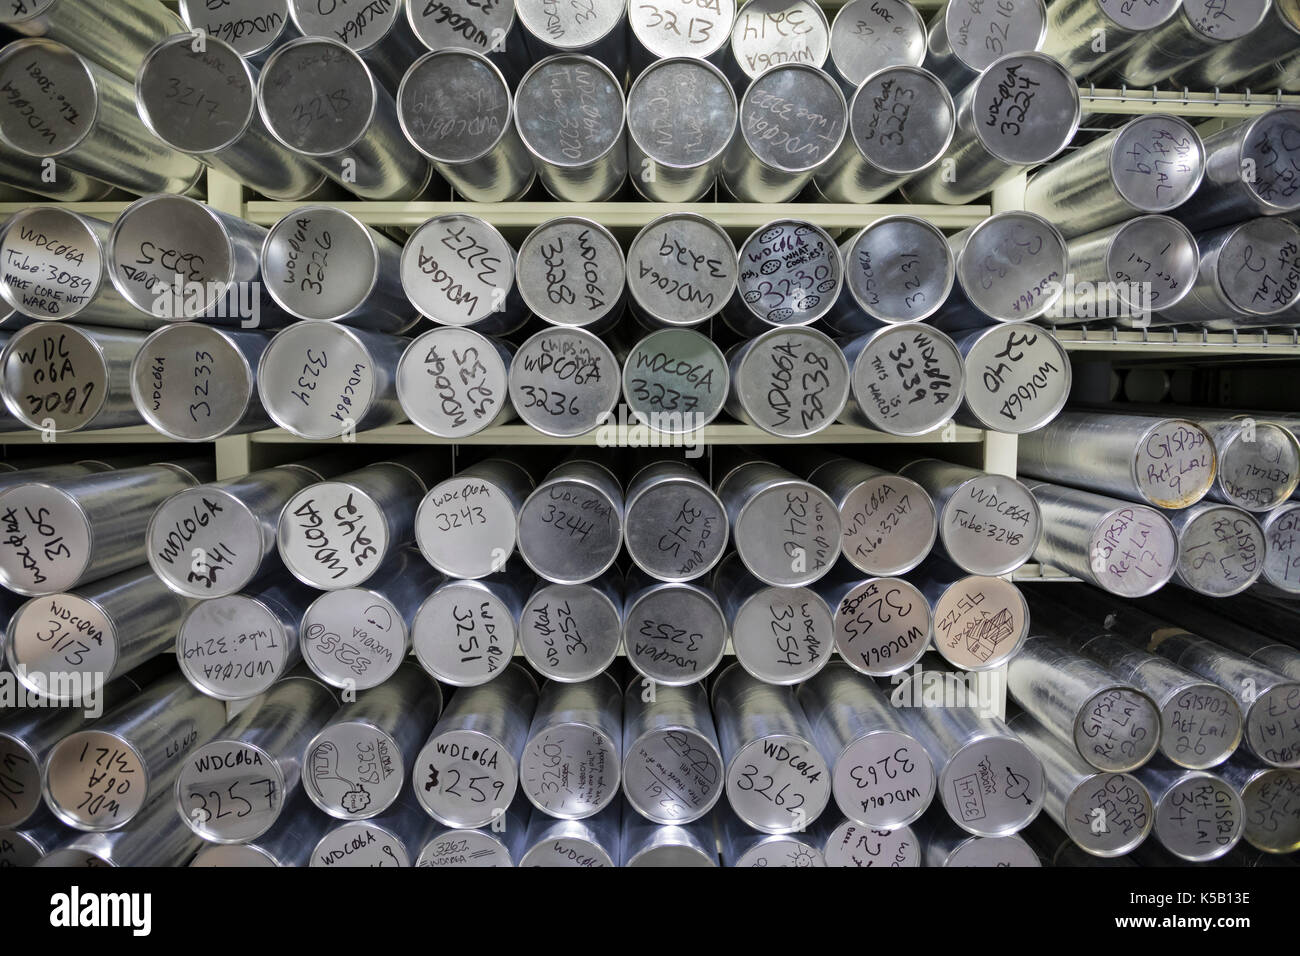 Denver, Colorado - Tubes holding ice cores stored at -36 degrees C (-33 degrees F) at the National Ice Core Laboratory. The lab stores 19,000 meters o Stock Photo